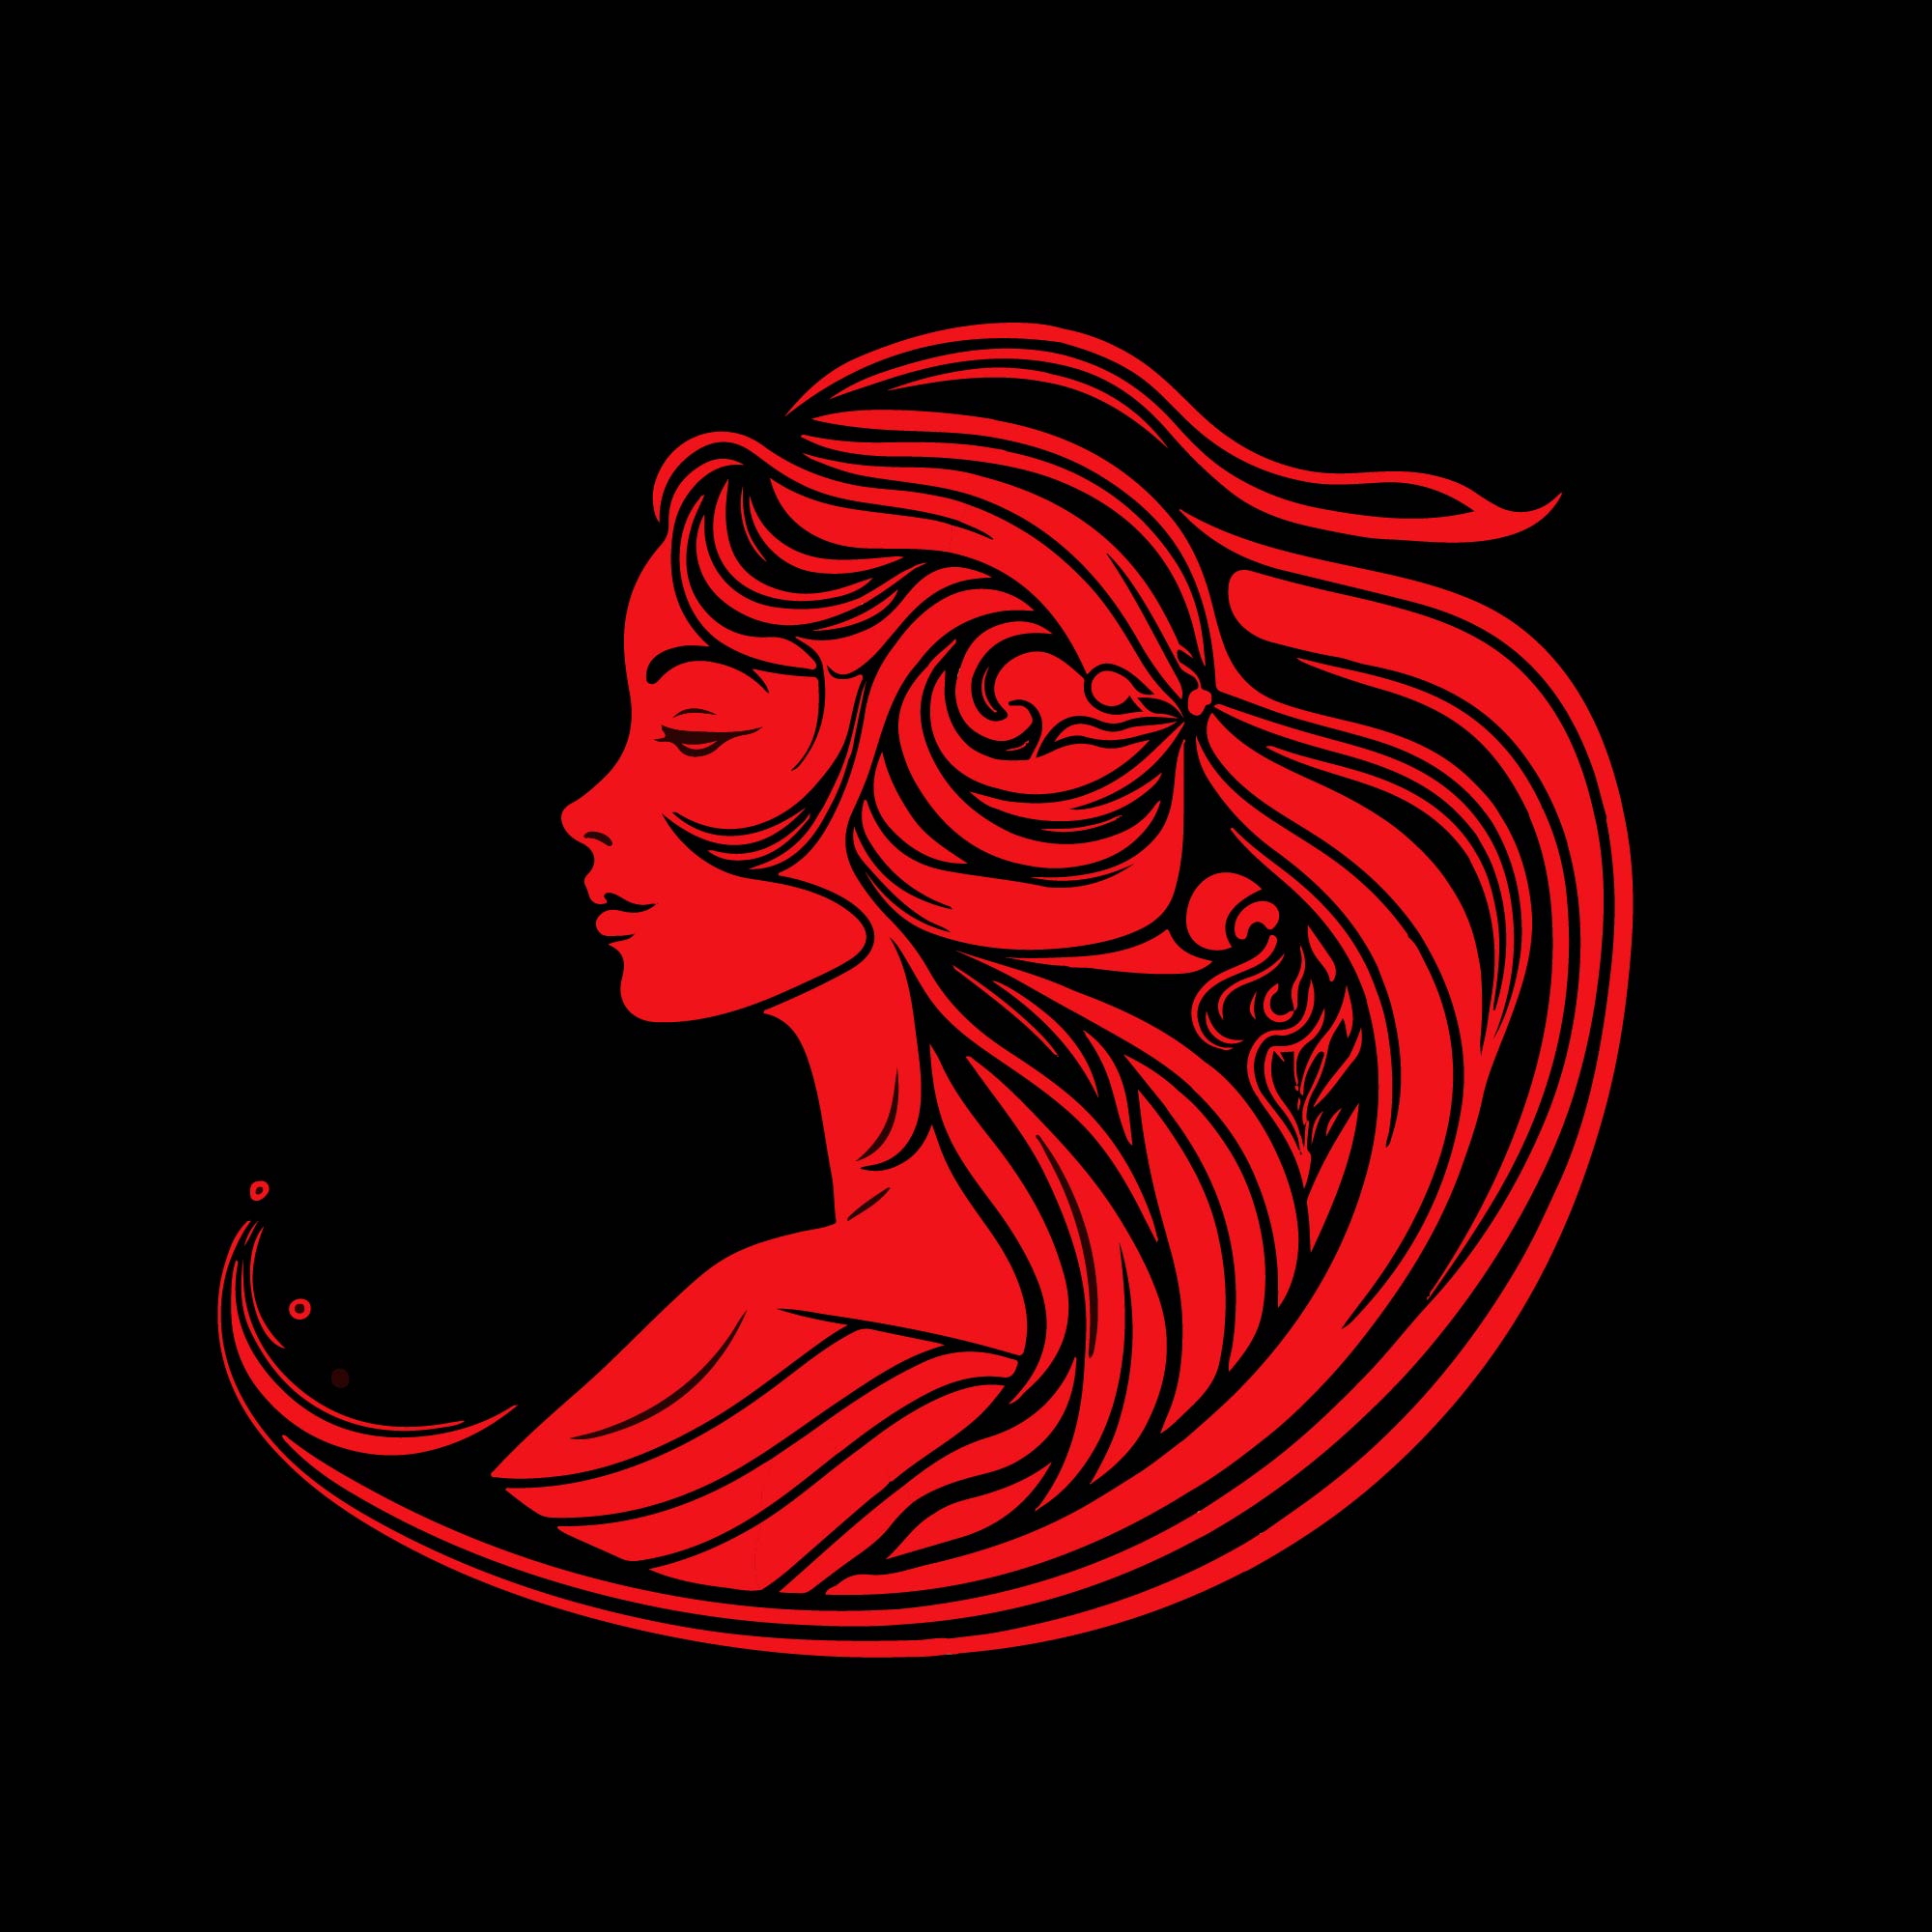 Beauty Girl Illustration with Black and Red color theme preview image.